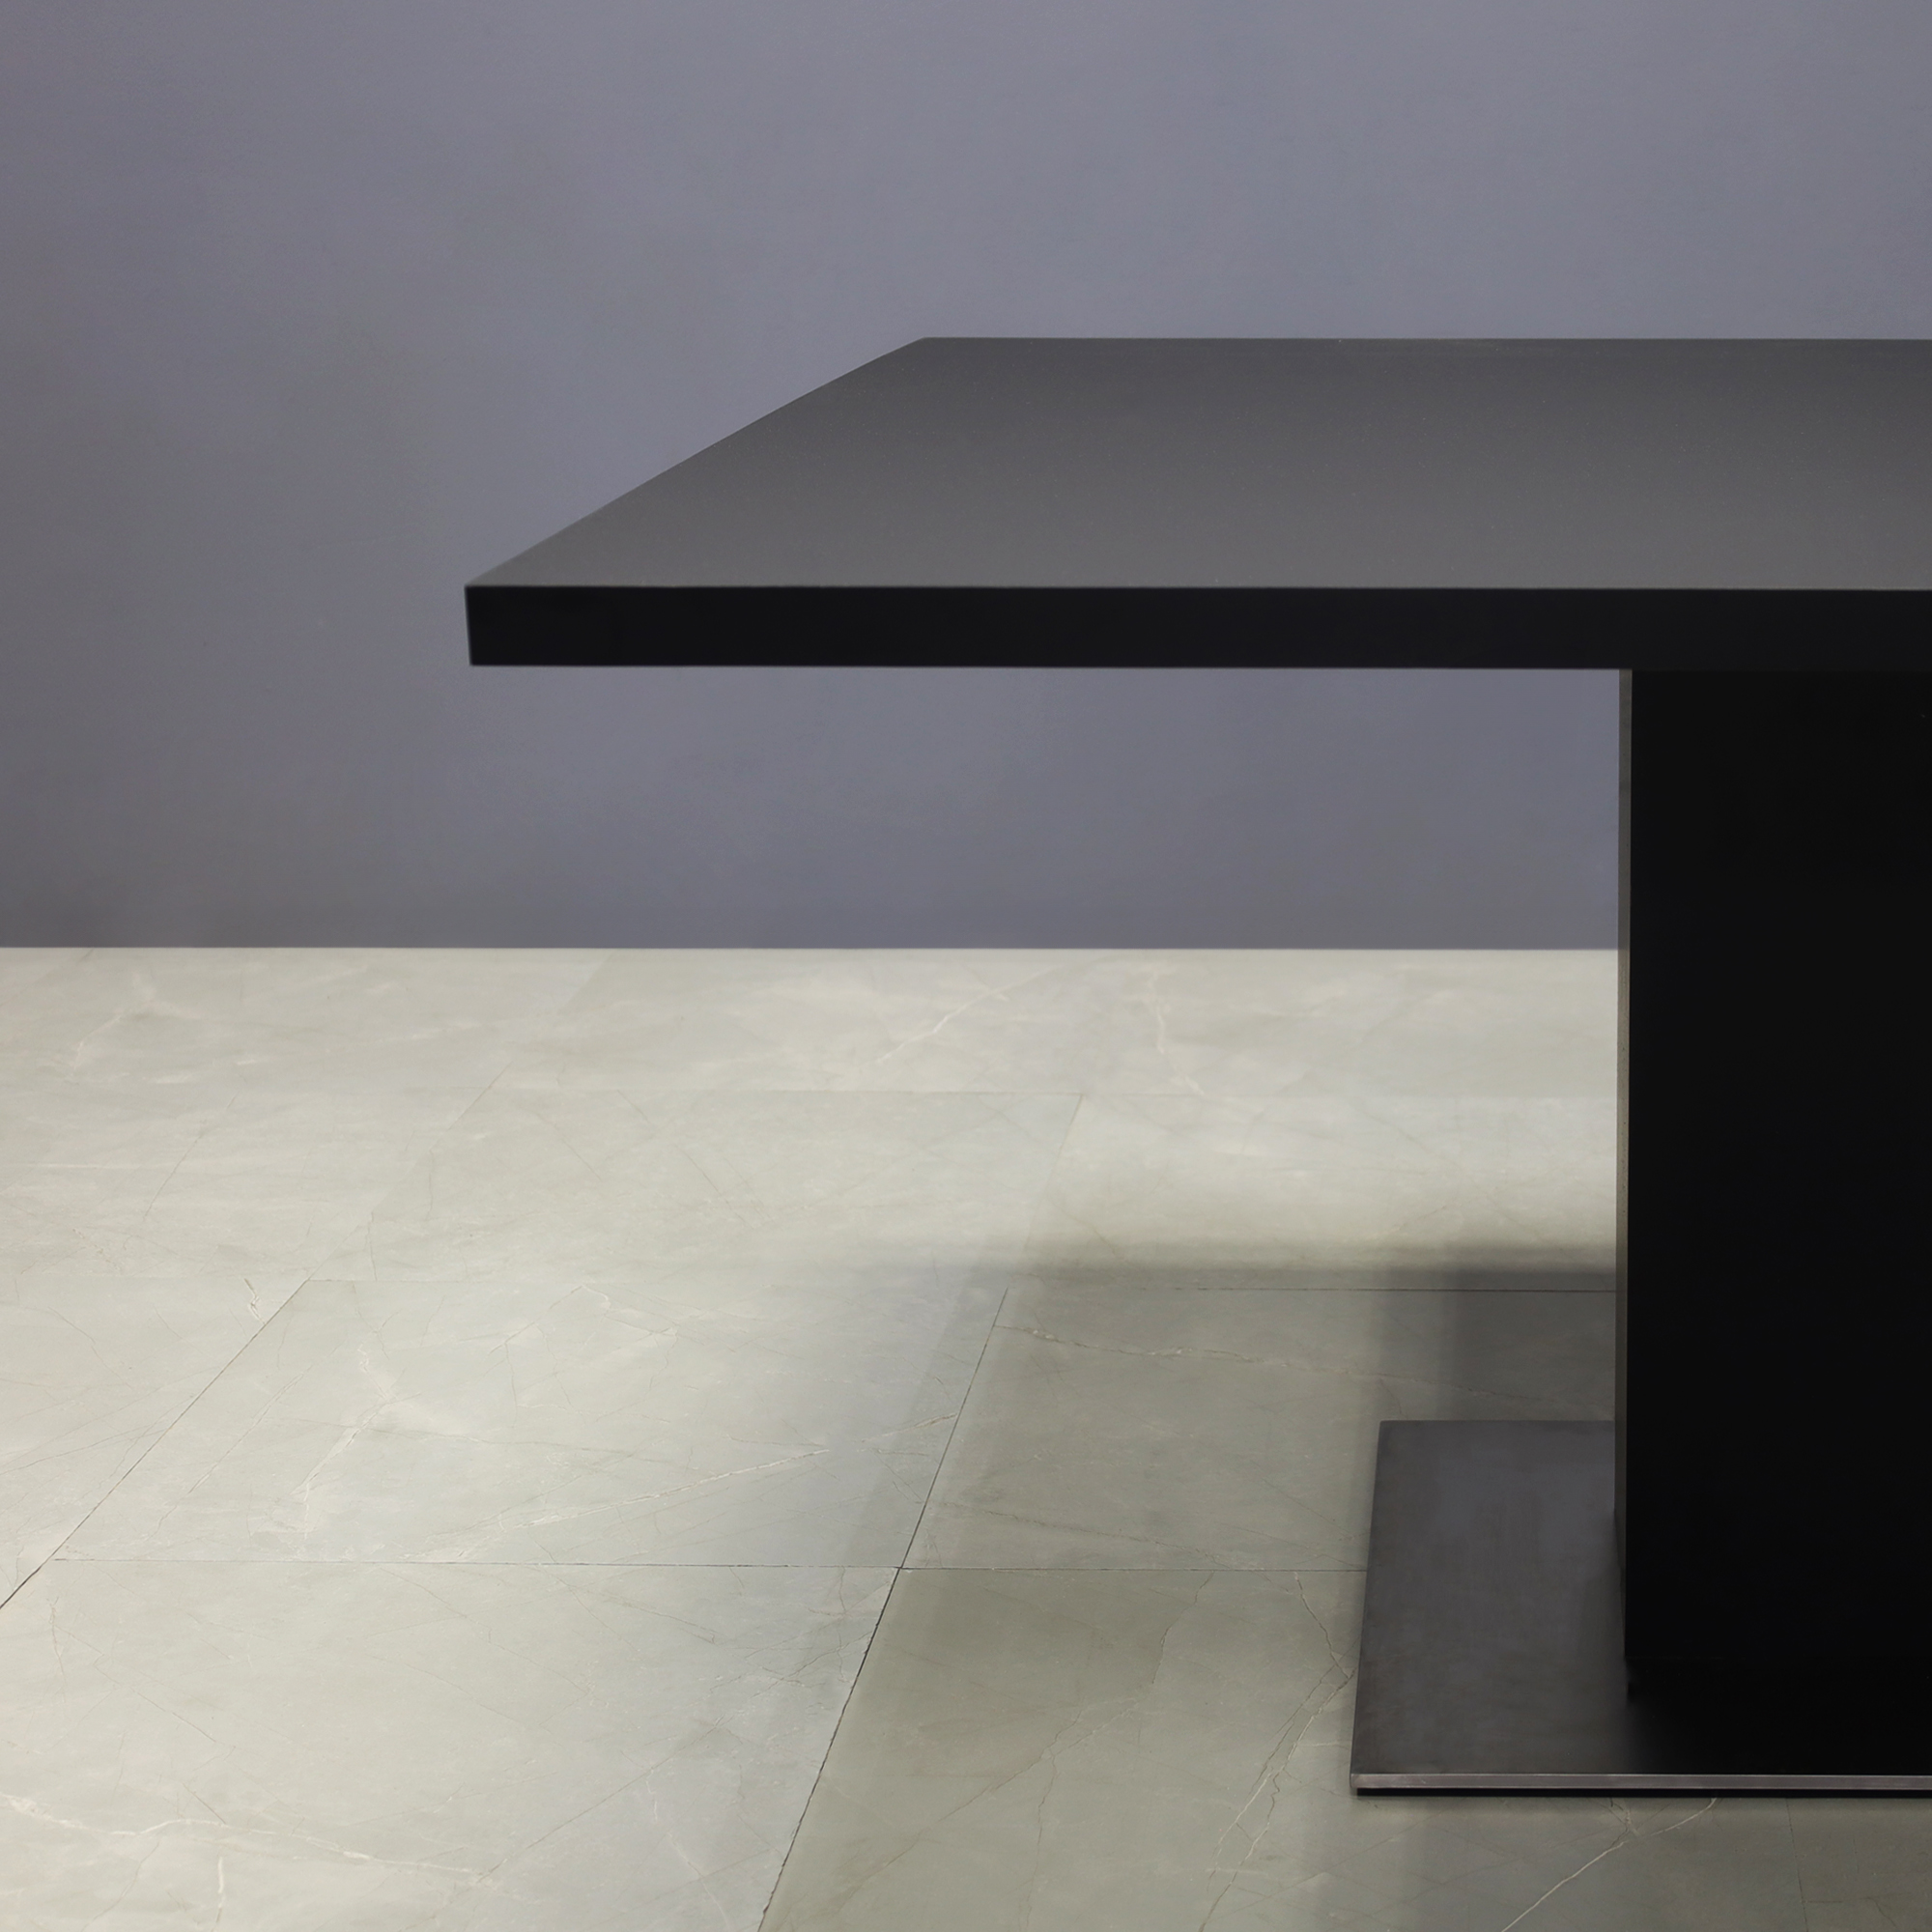 54-inch California Square Conference Table in black traceless laminate top and column, and silver stainless steel base, shown here.